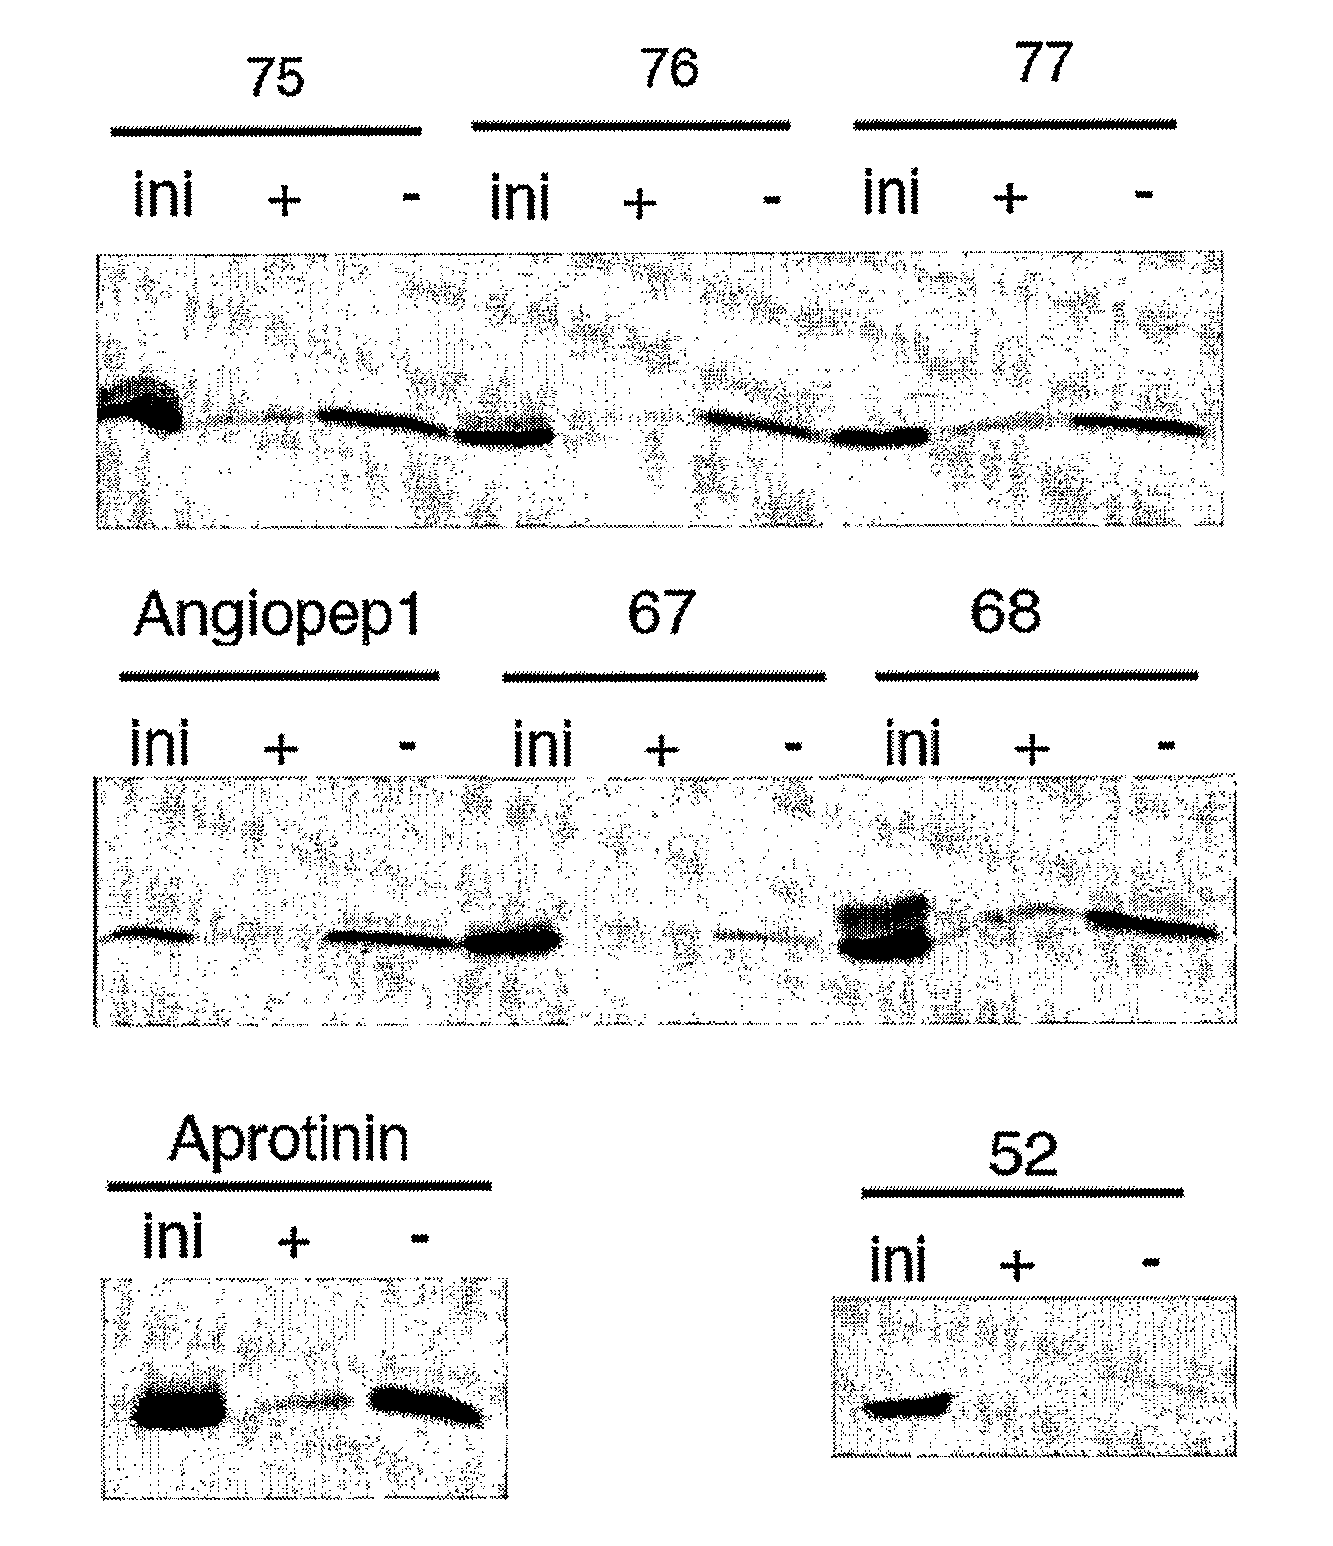 Aprotinin Polypeptides for Transporting a Compound Across the Blood-Brain Barrier